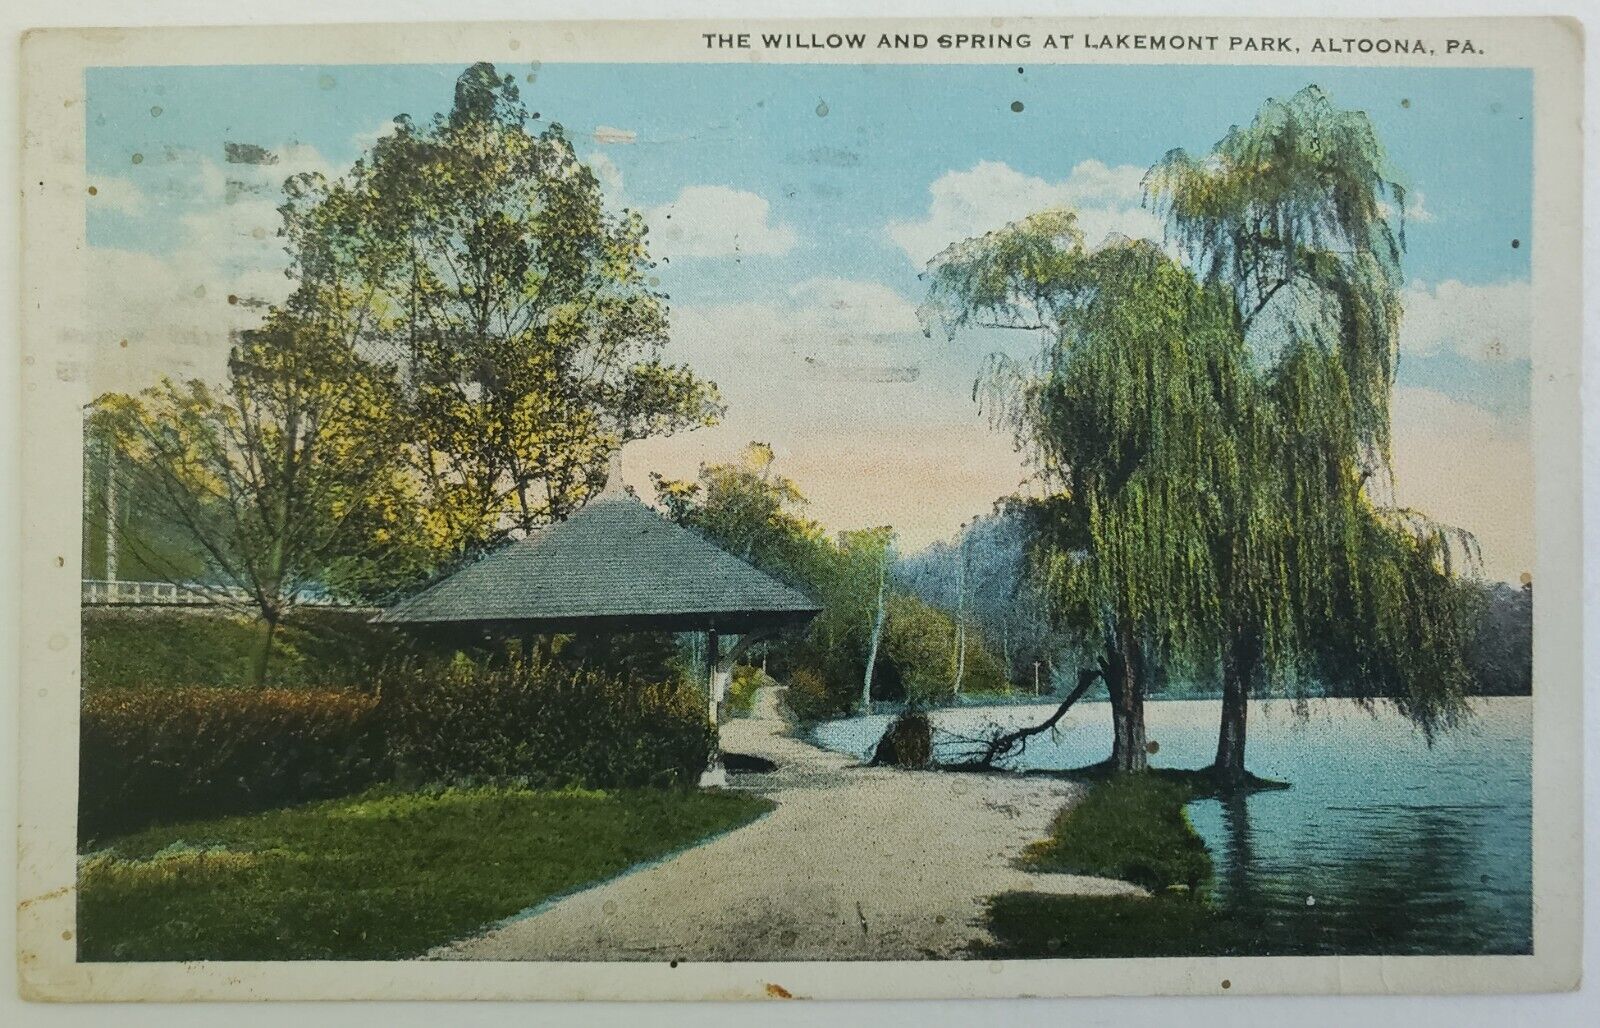 Altoona, PA Pennsylvania Lakemont Park The Willow and Spring 1922 Postcard b68